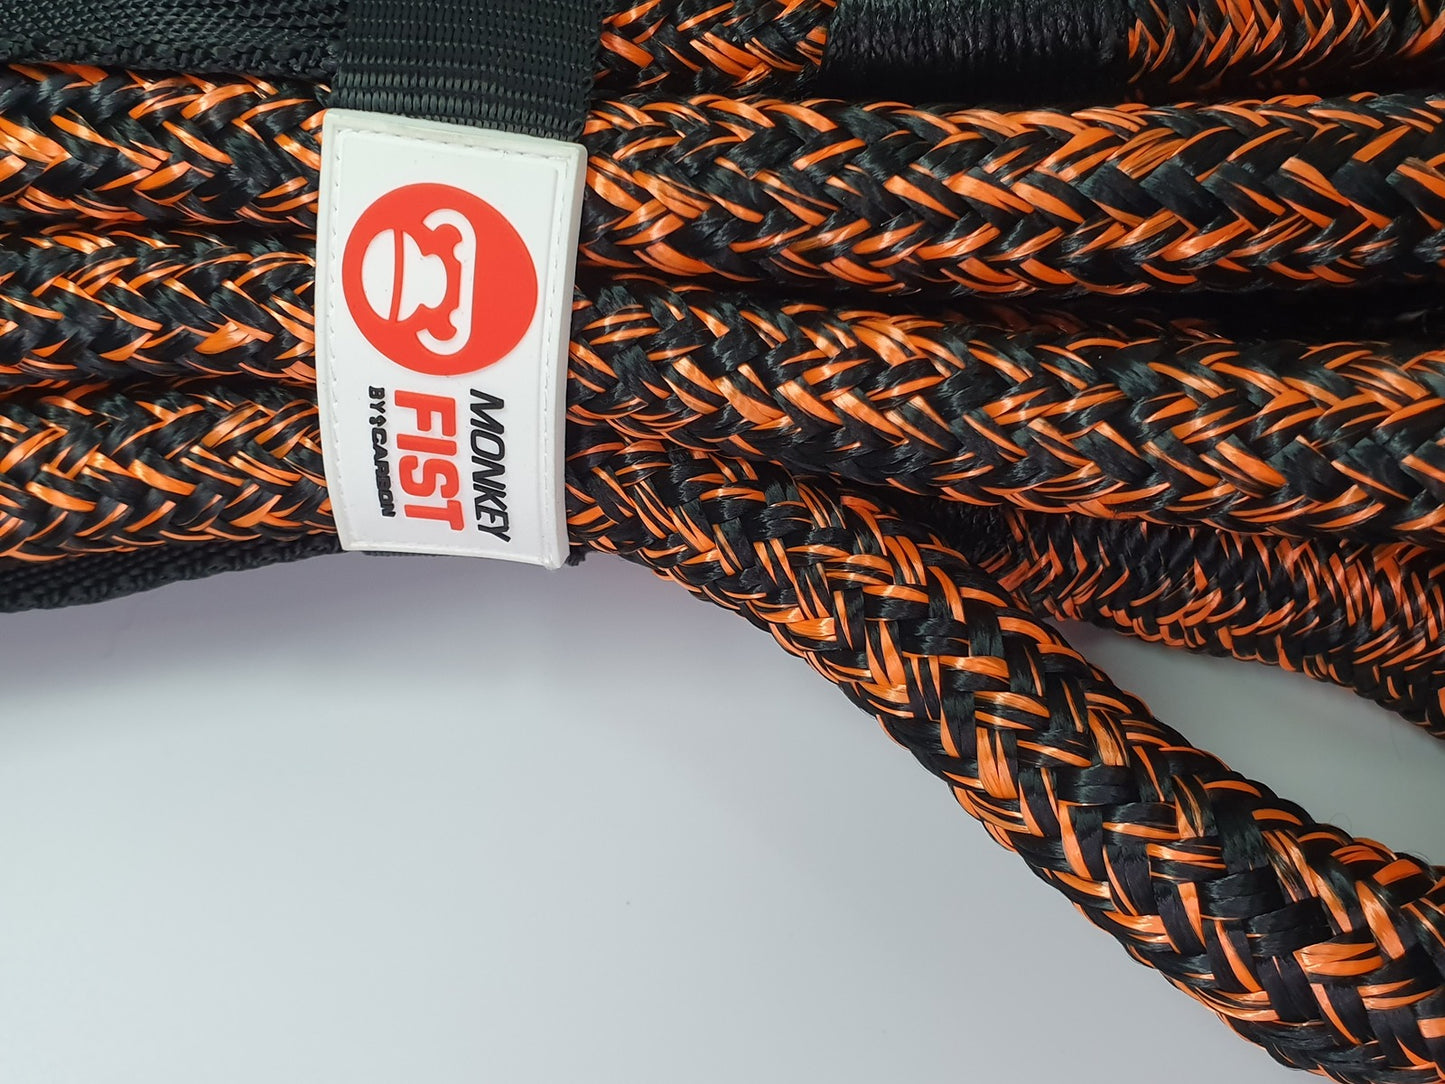 MONKEY FIST ALL PURPOSE RECOVERY ROPE 4M X 14155KG